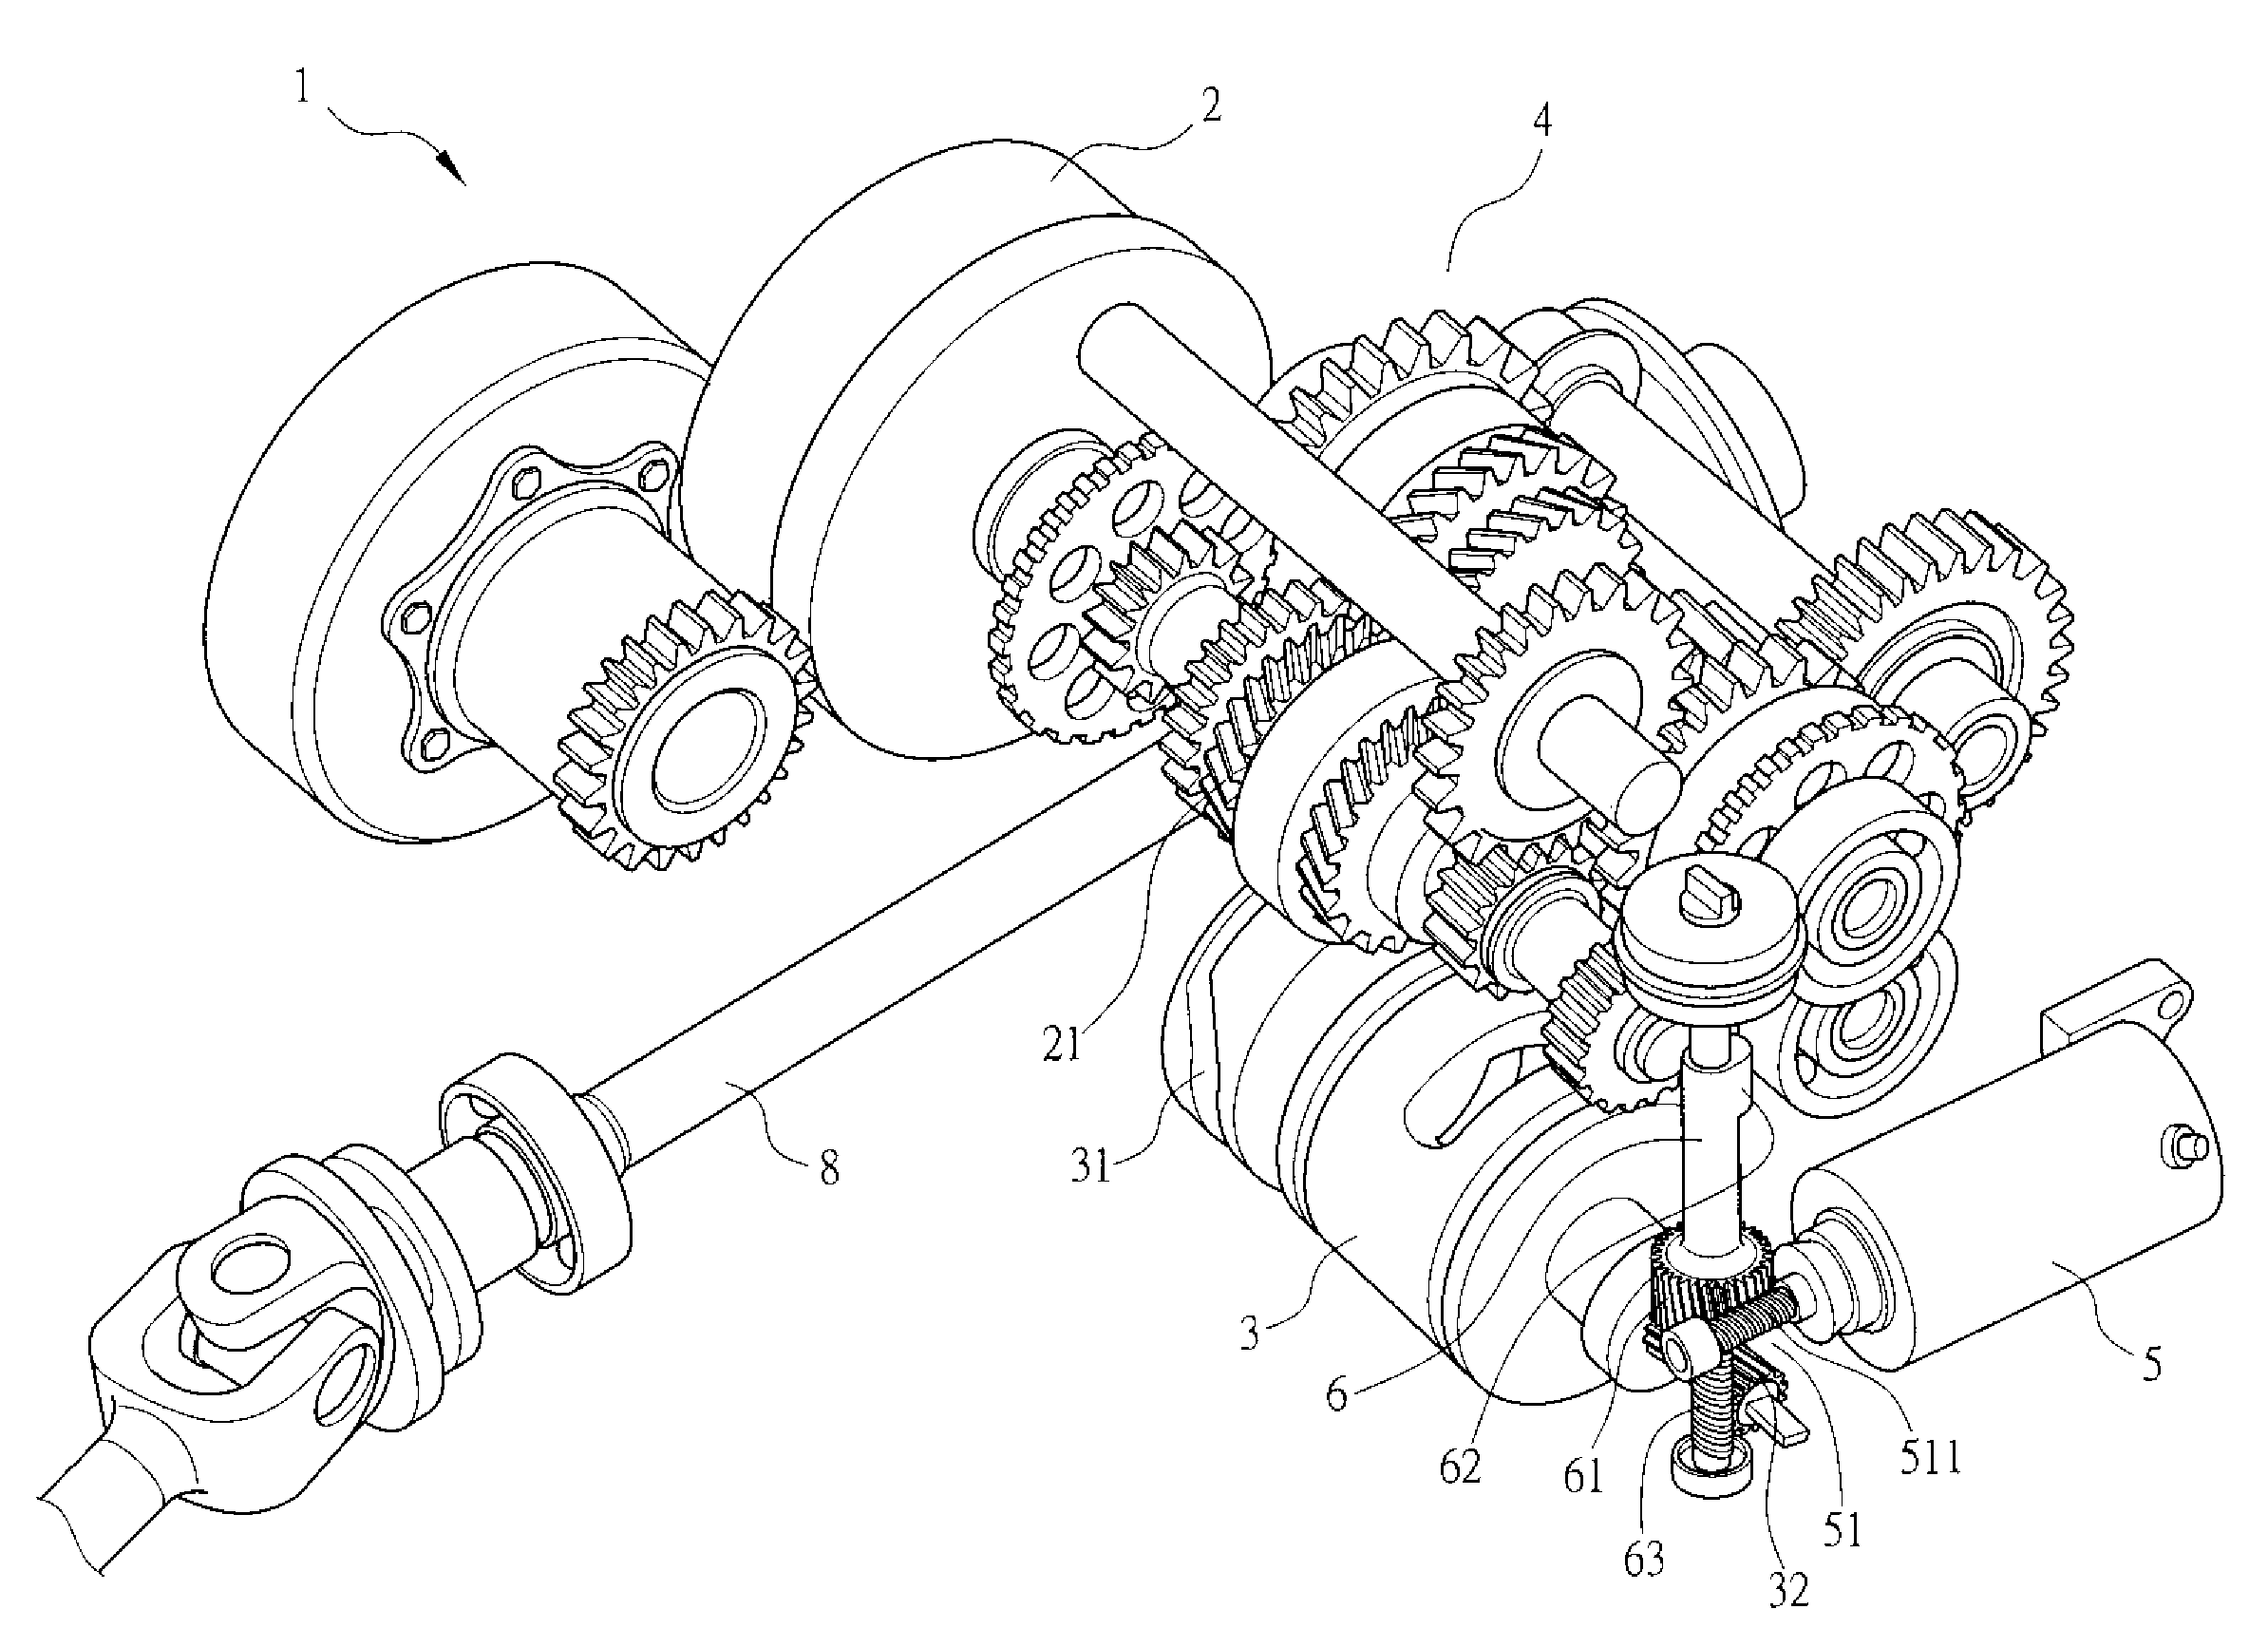 Gear-shifting structure for vehicle